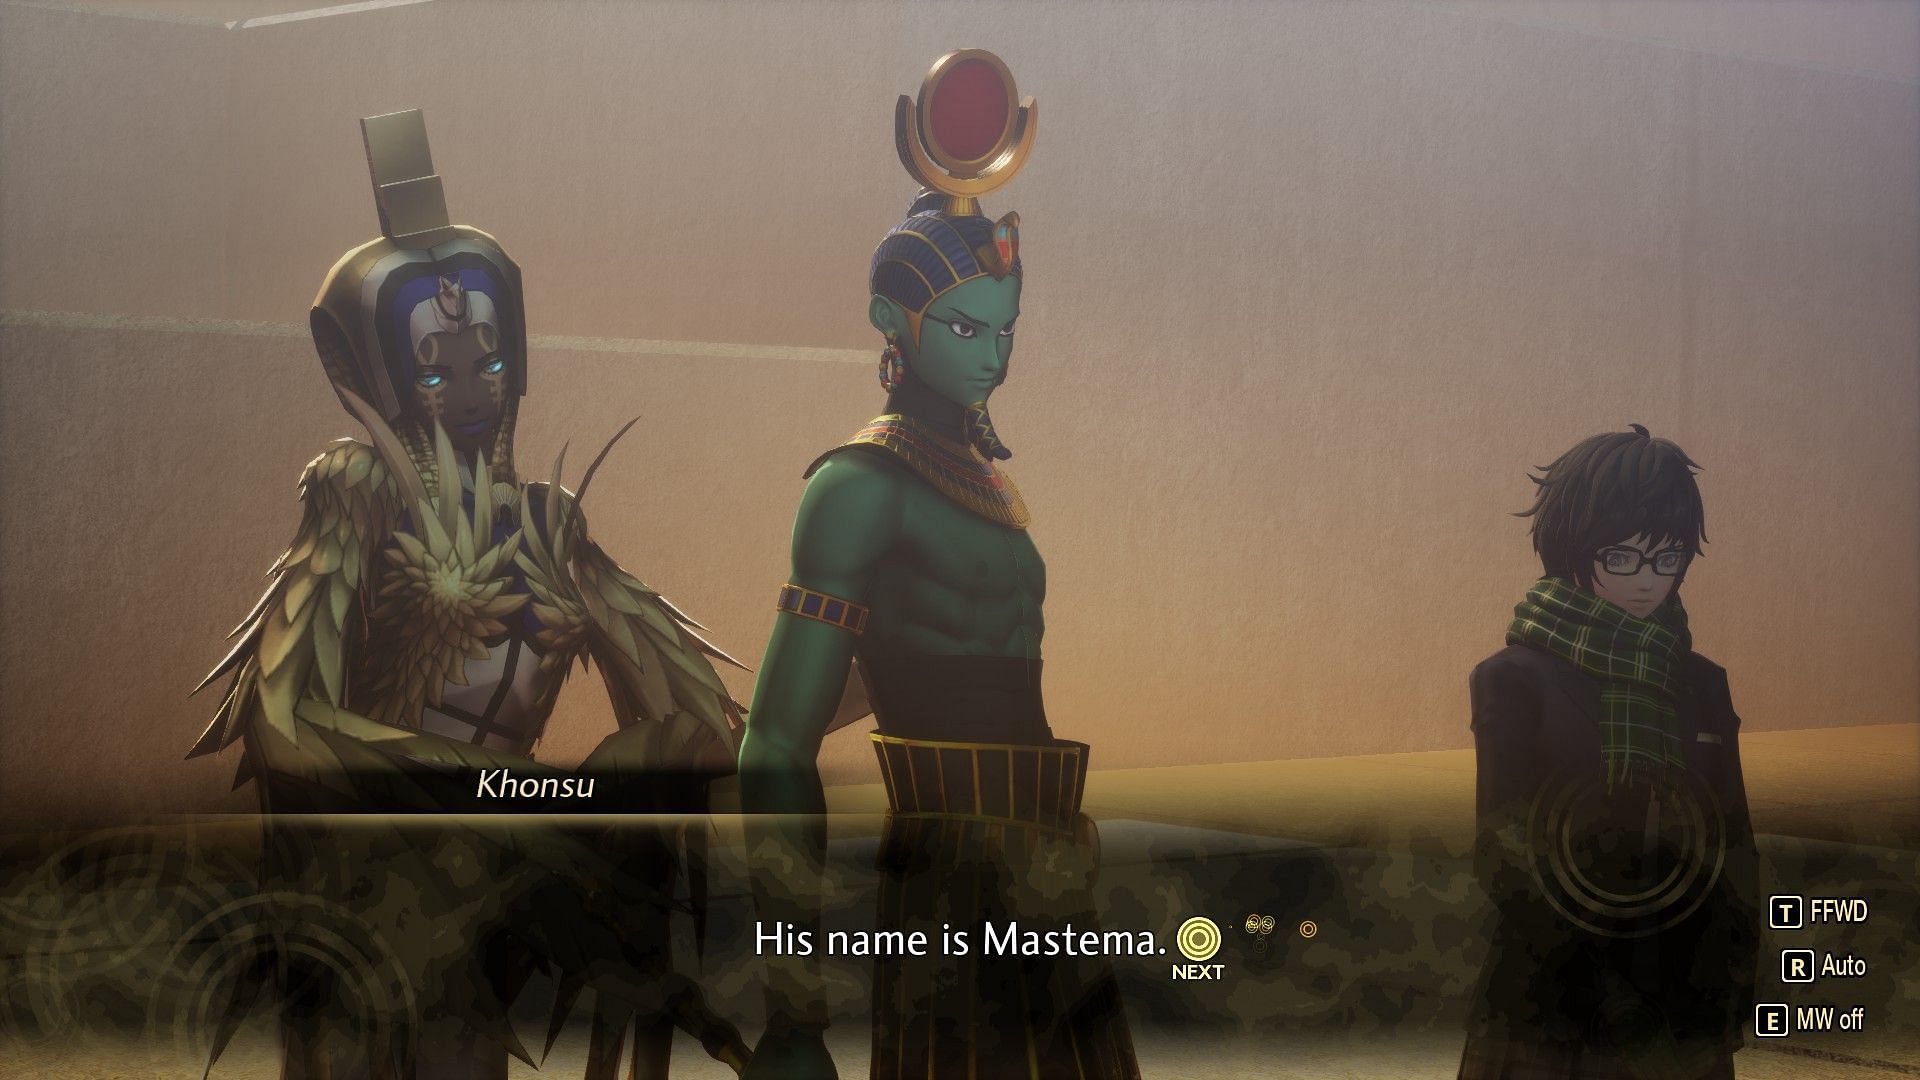 Khonsu will aid you once defeat him (Image via Atlus)